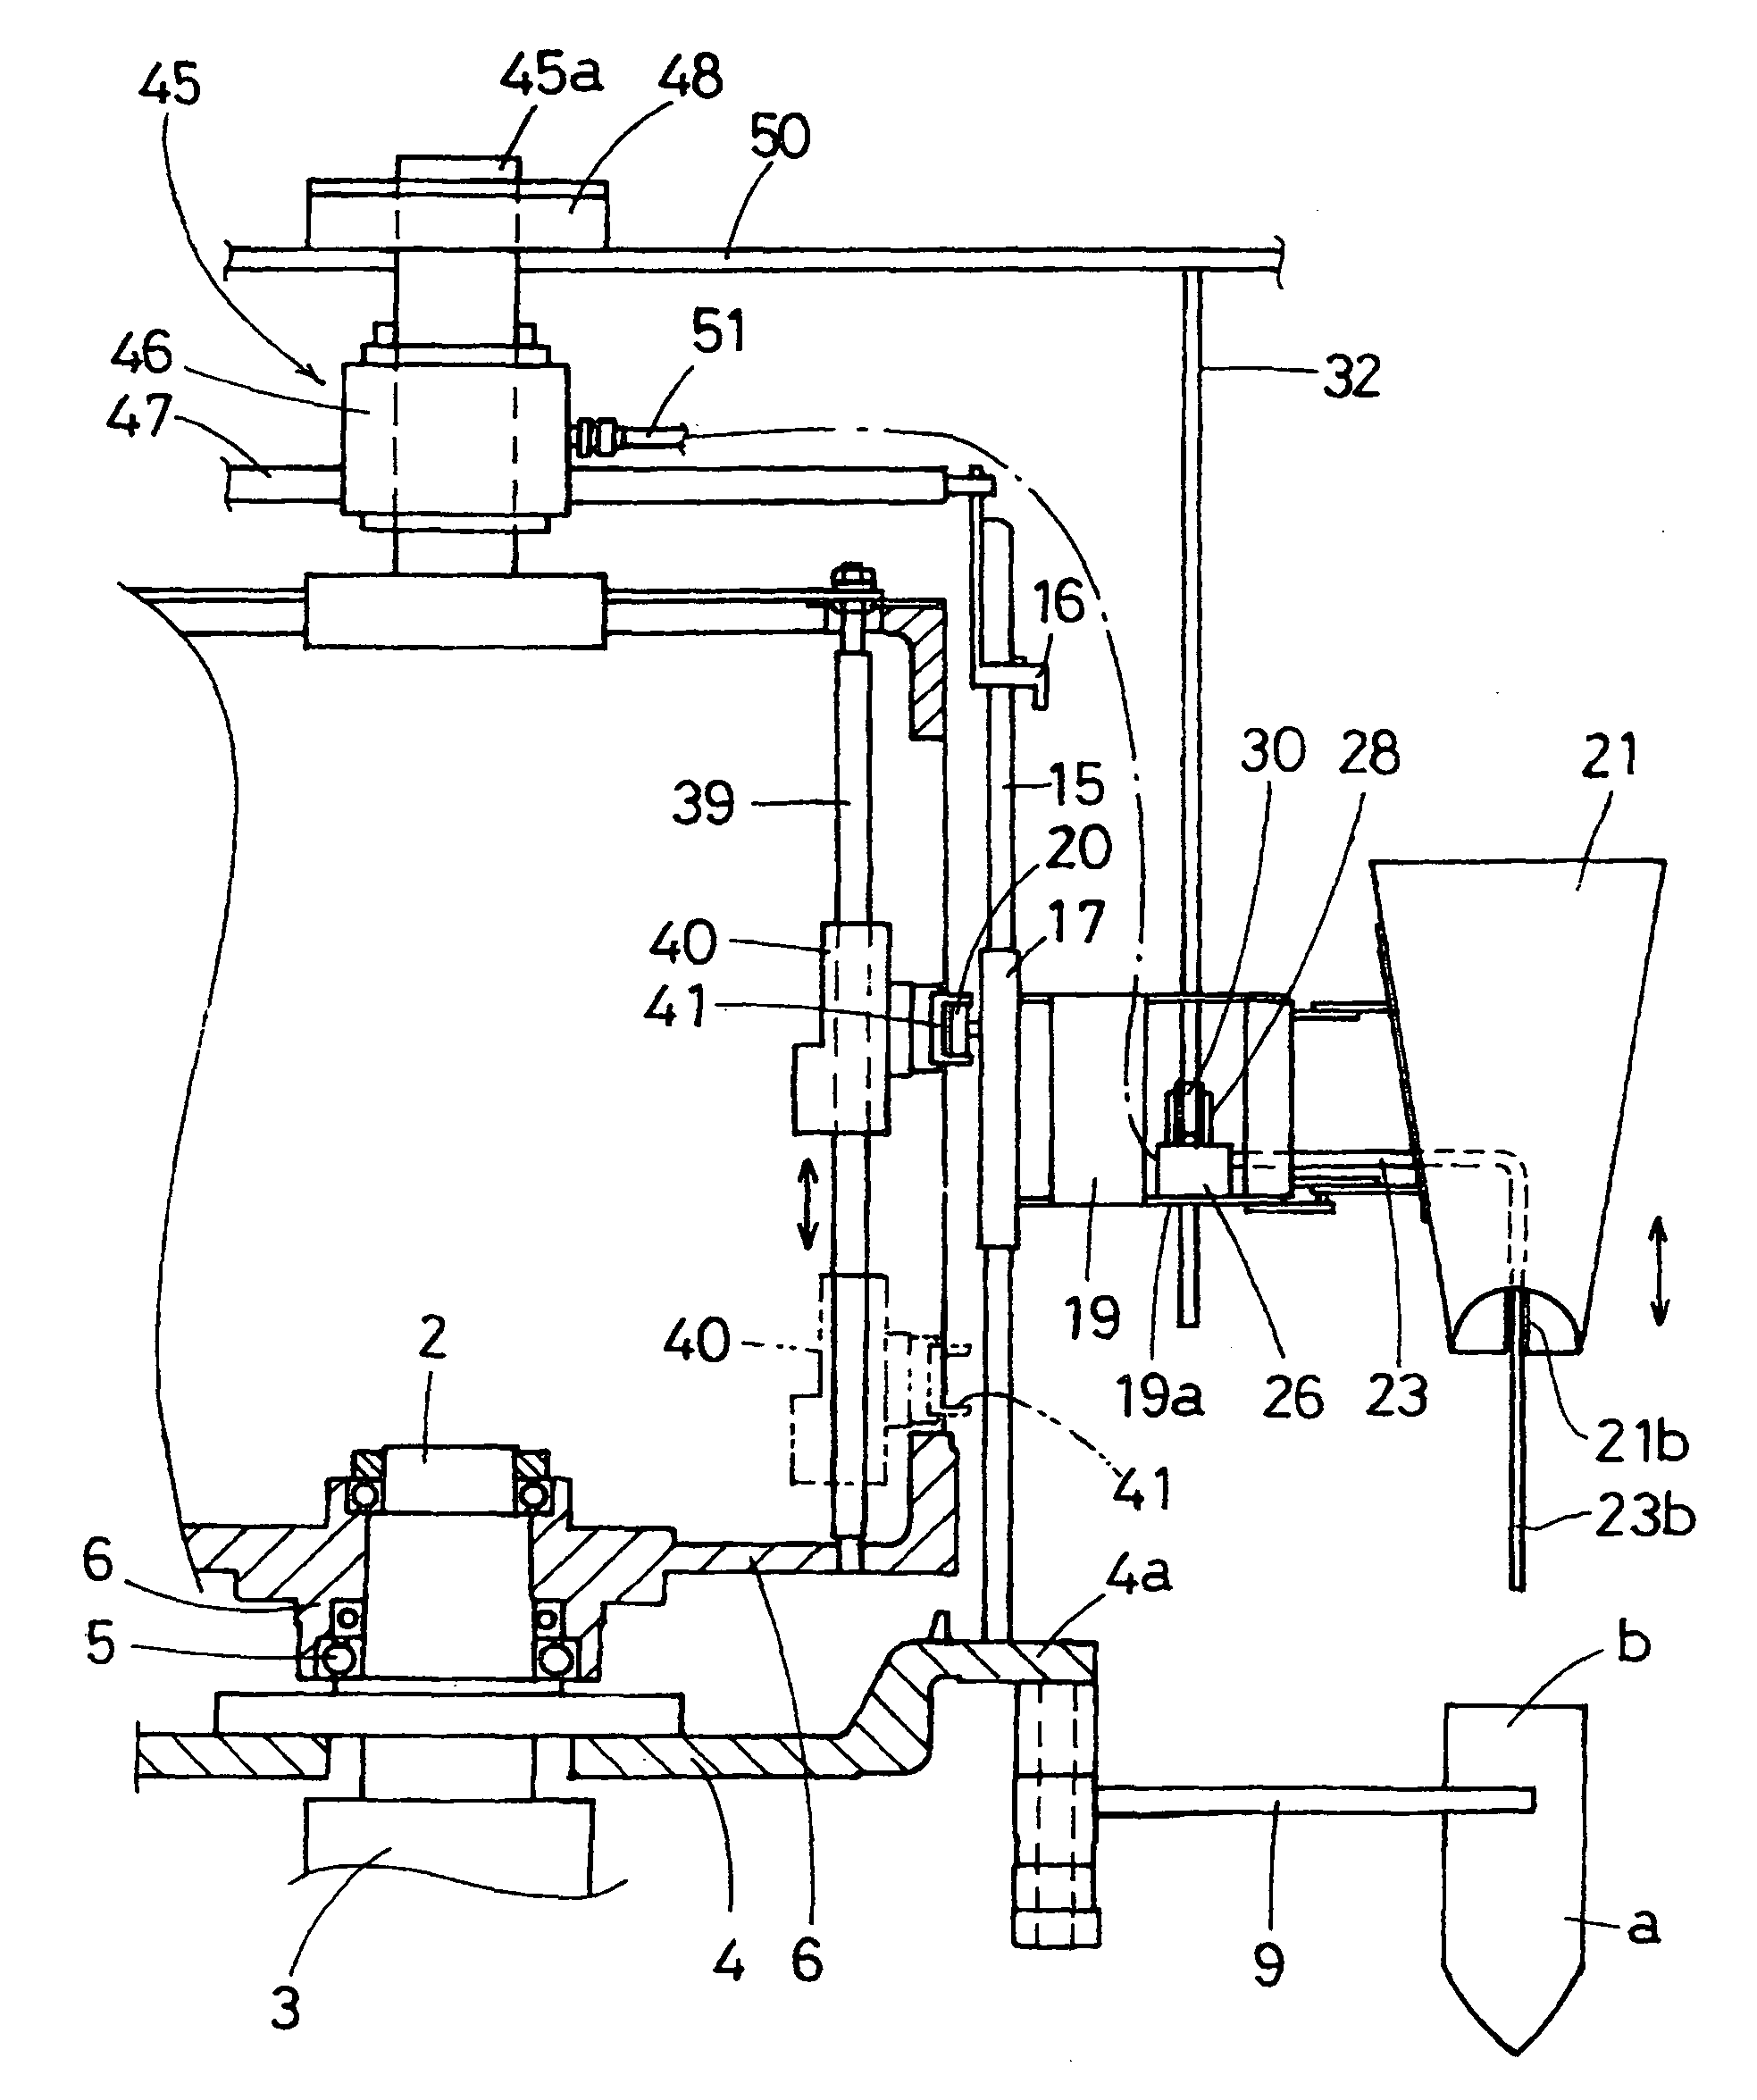 Method for placing inert gas in gas-filling packaging machine